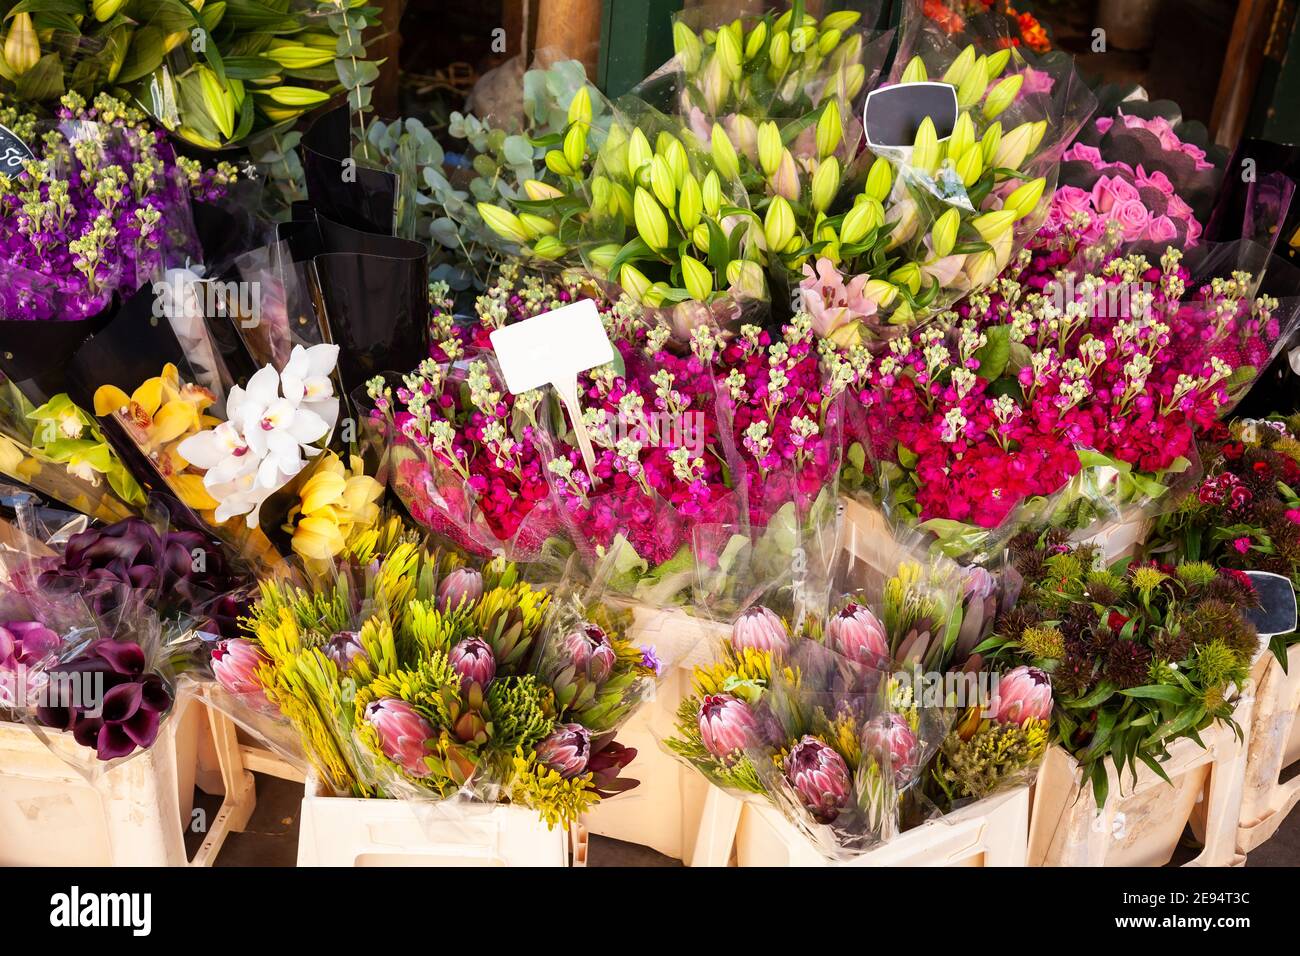 Various flower bouquets in baskets with price tags for sale at a street market in England Stock Photo